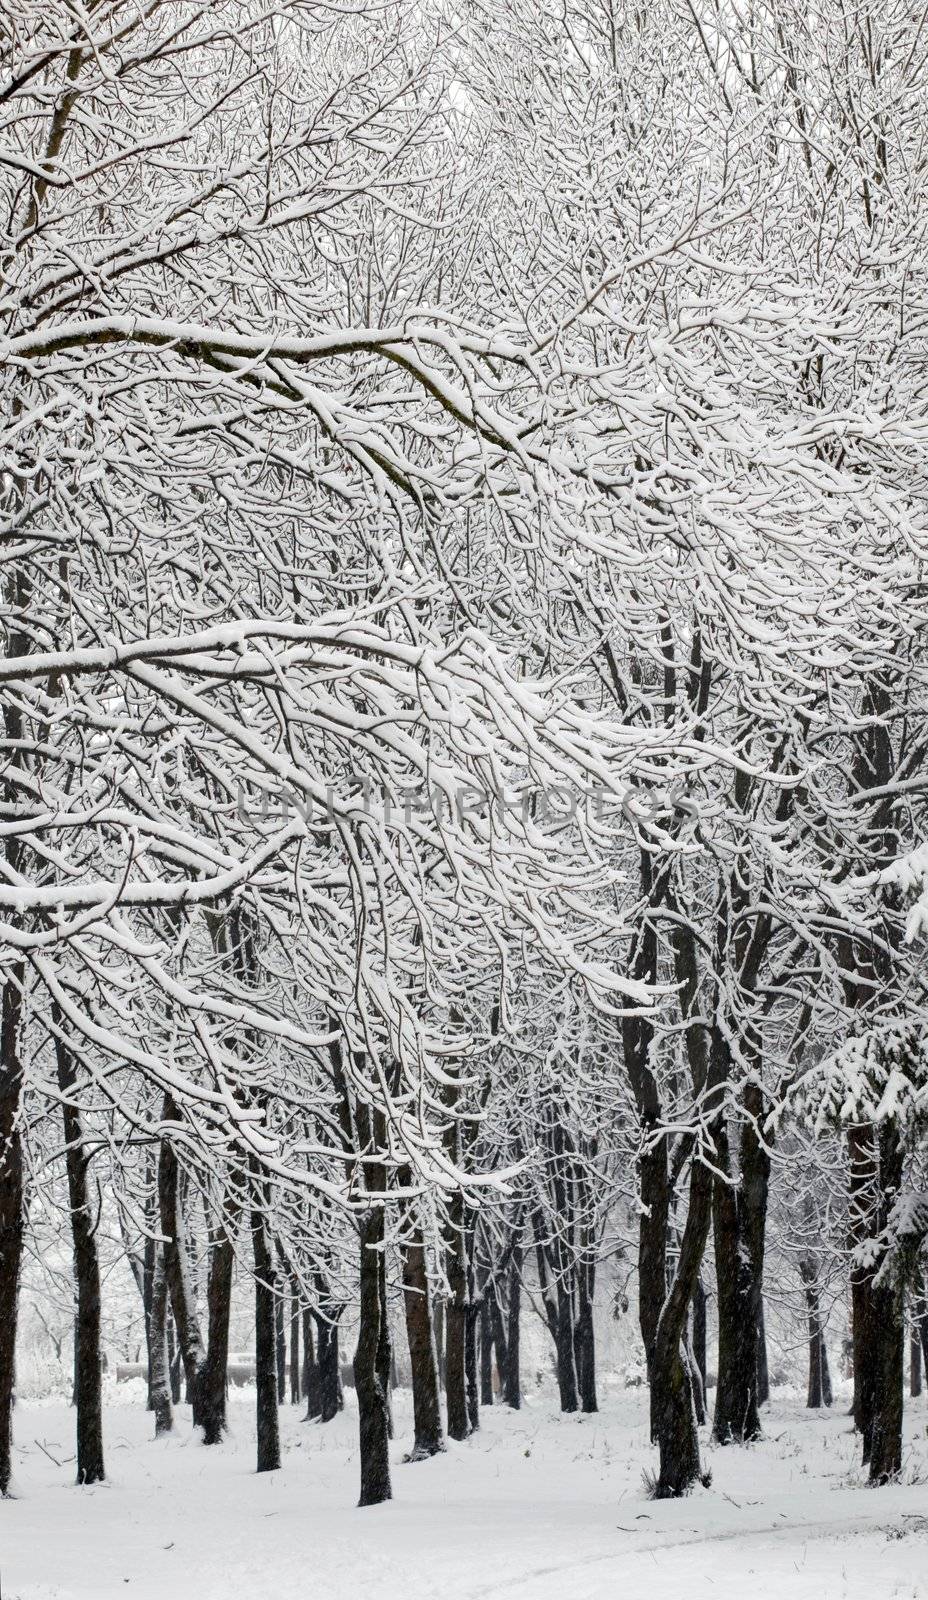 An image of cover of snow on a trees